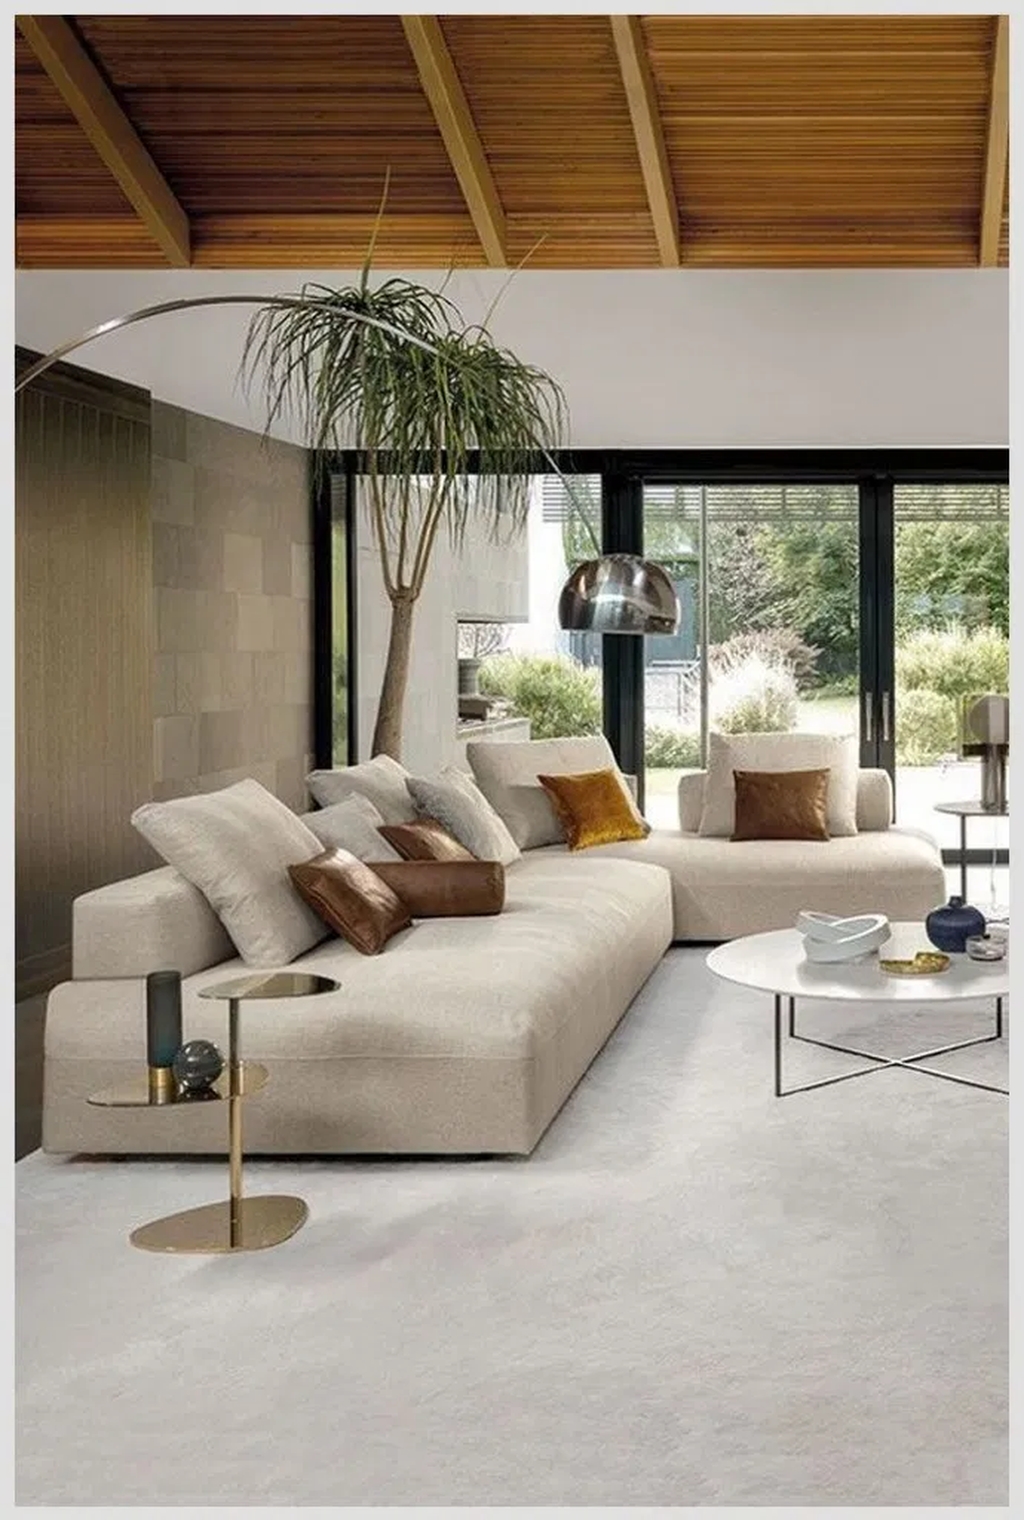 Modern And Minimalist Sofa For Your Living Room22